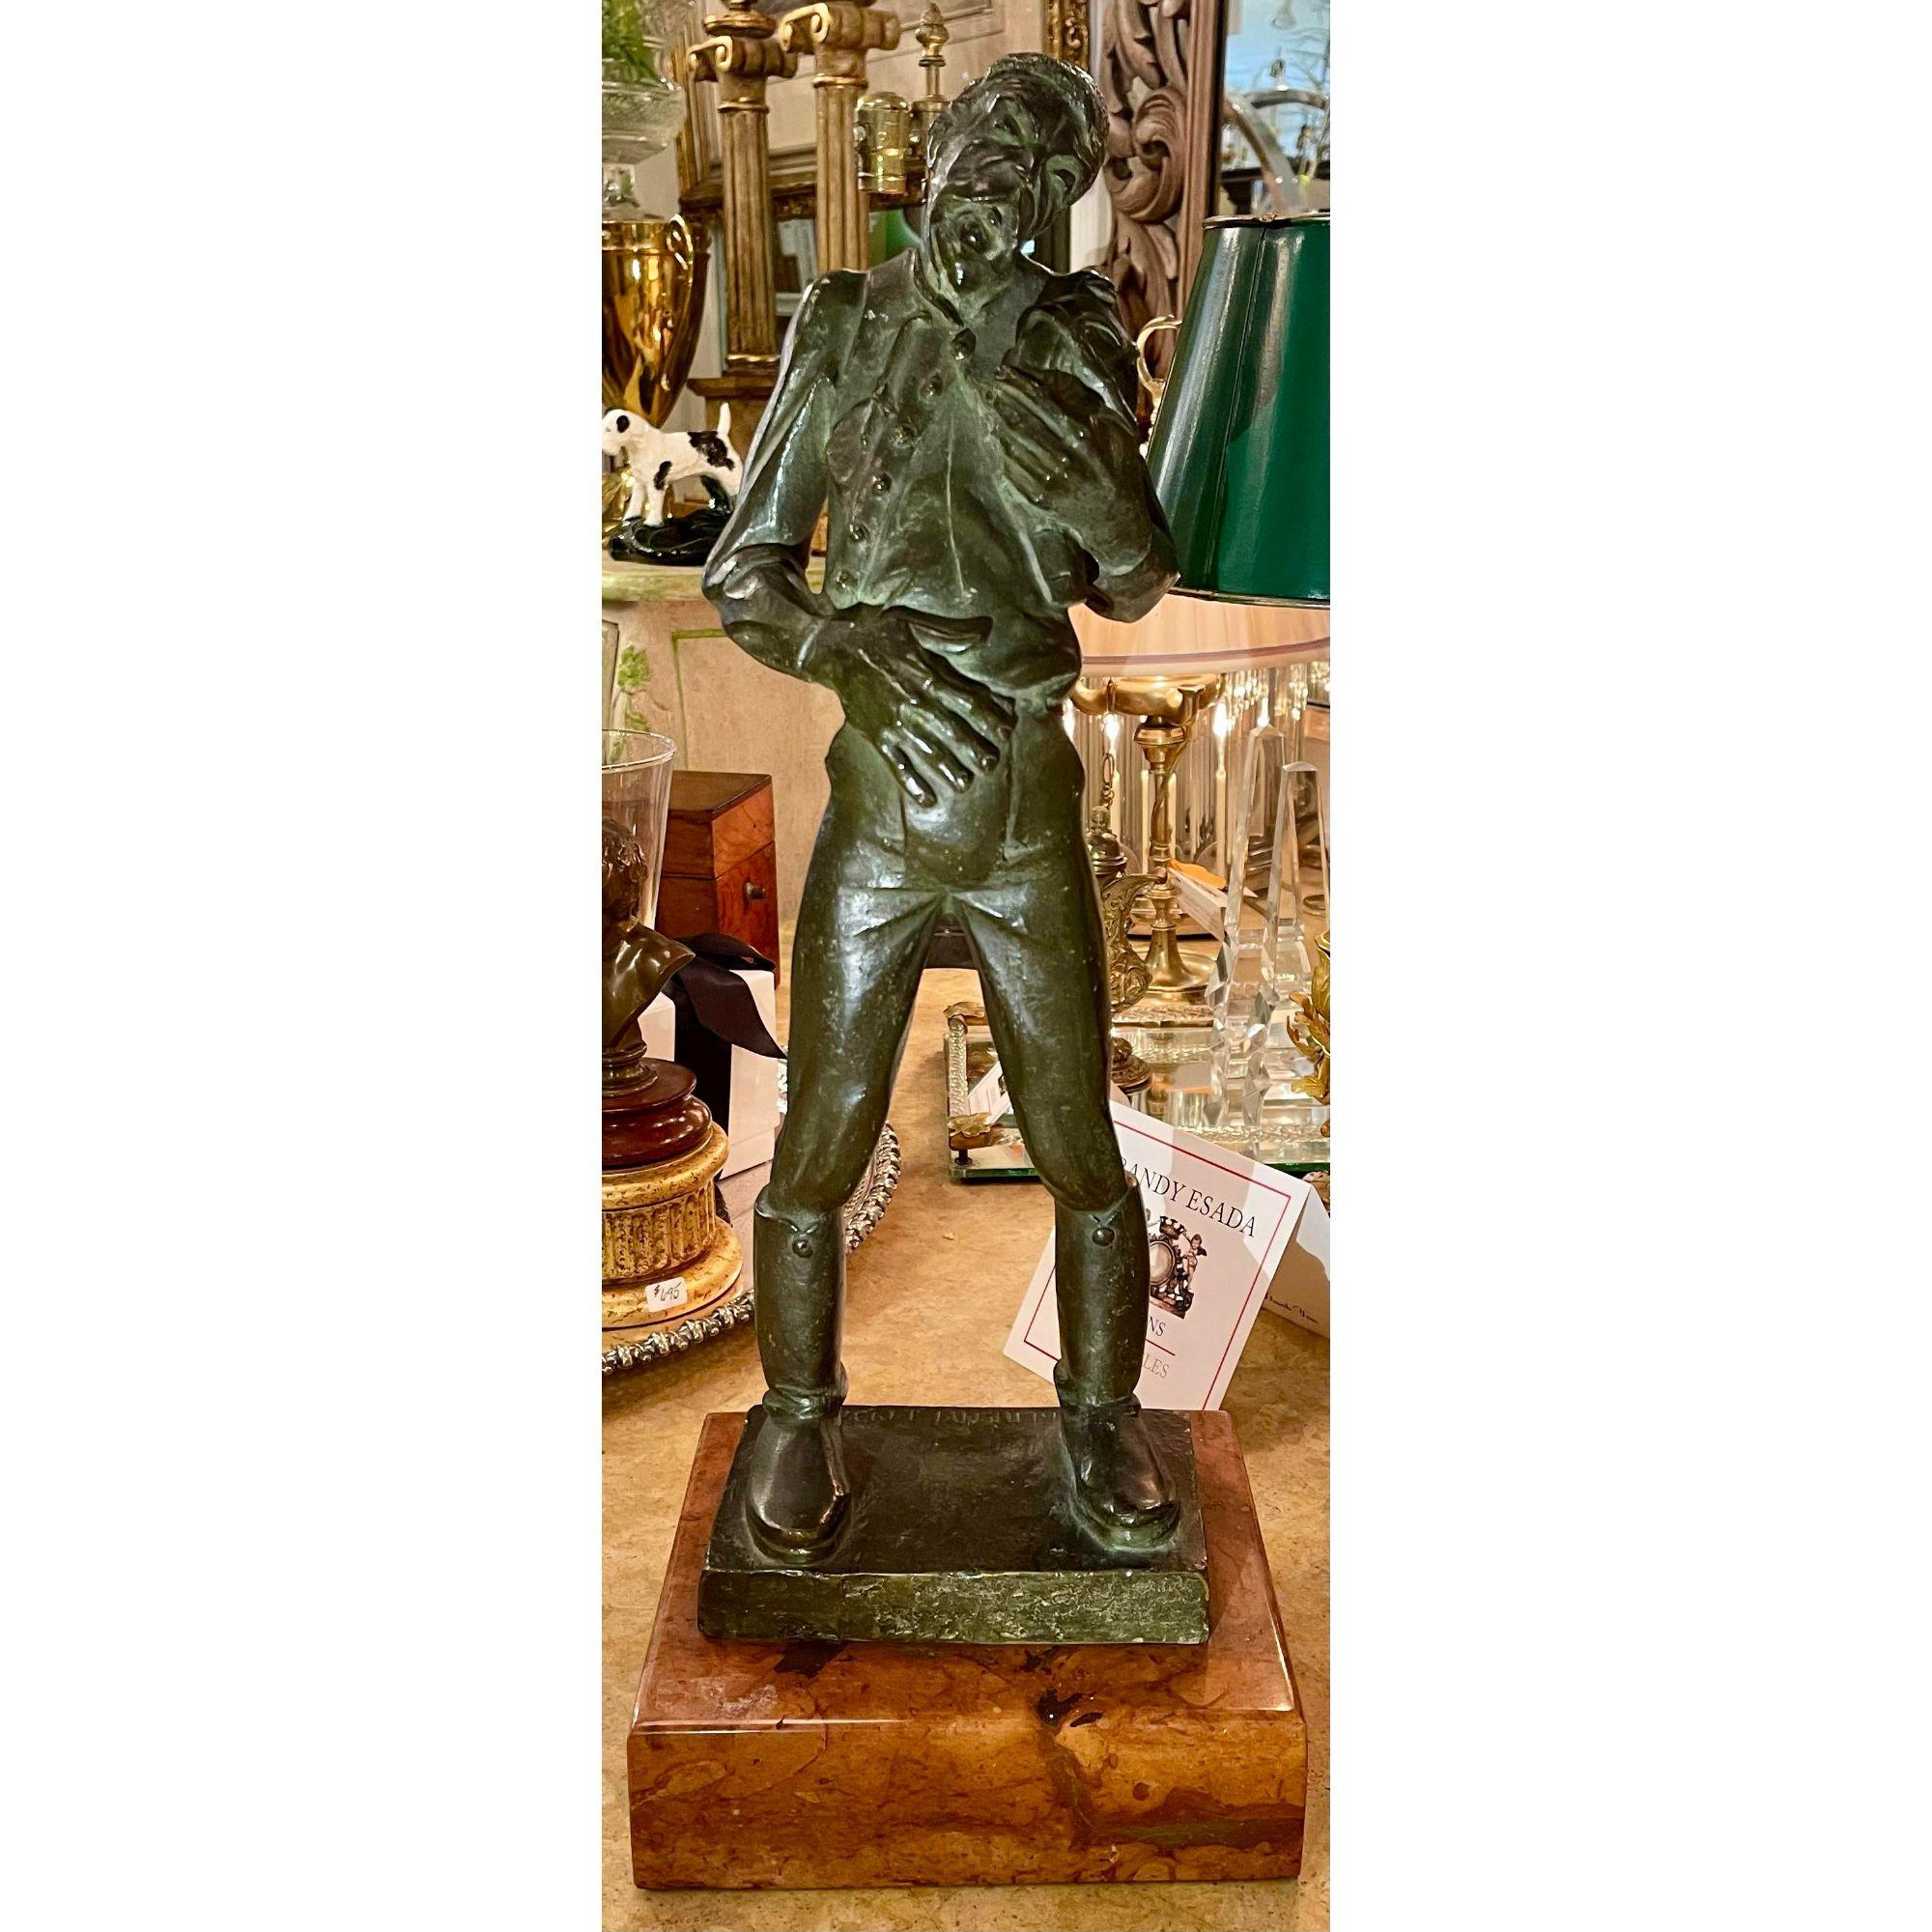 Antique Hungarian bronze sculpture by Jenn Kerenyi

Additional information: 
Materials: Bronze
Color: Green
Period: 19th century
Styles: Expressionism
Art subjects: Figure
Item Type: Vintage, Antique or Pre-owned
Dimensions: 8